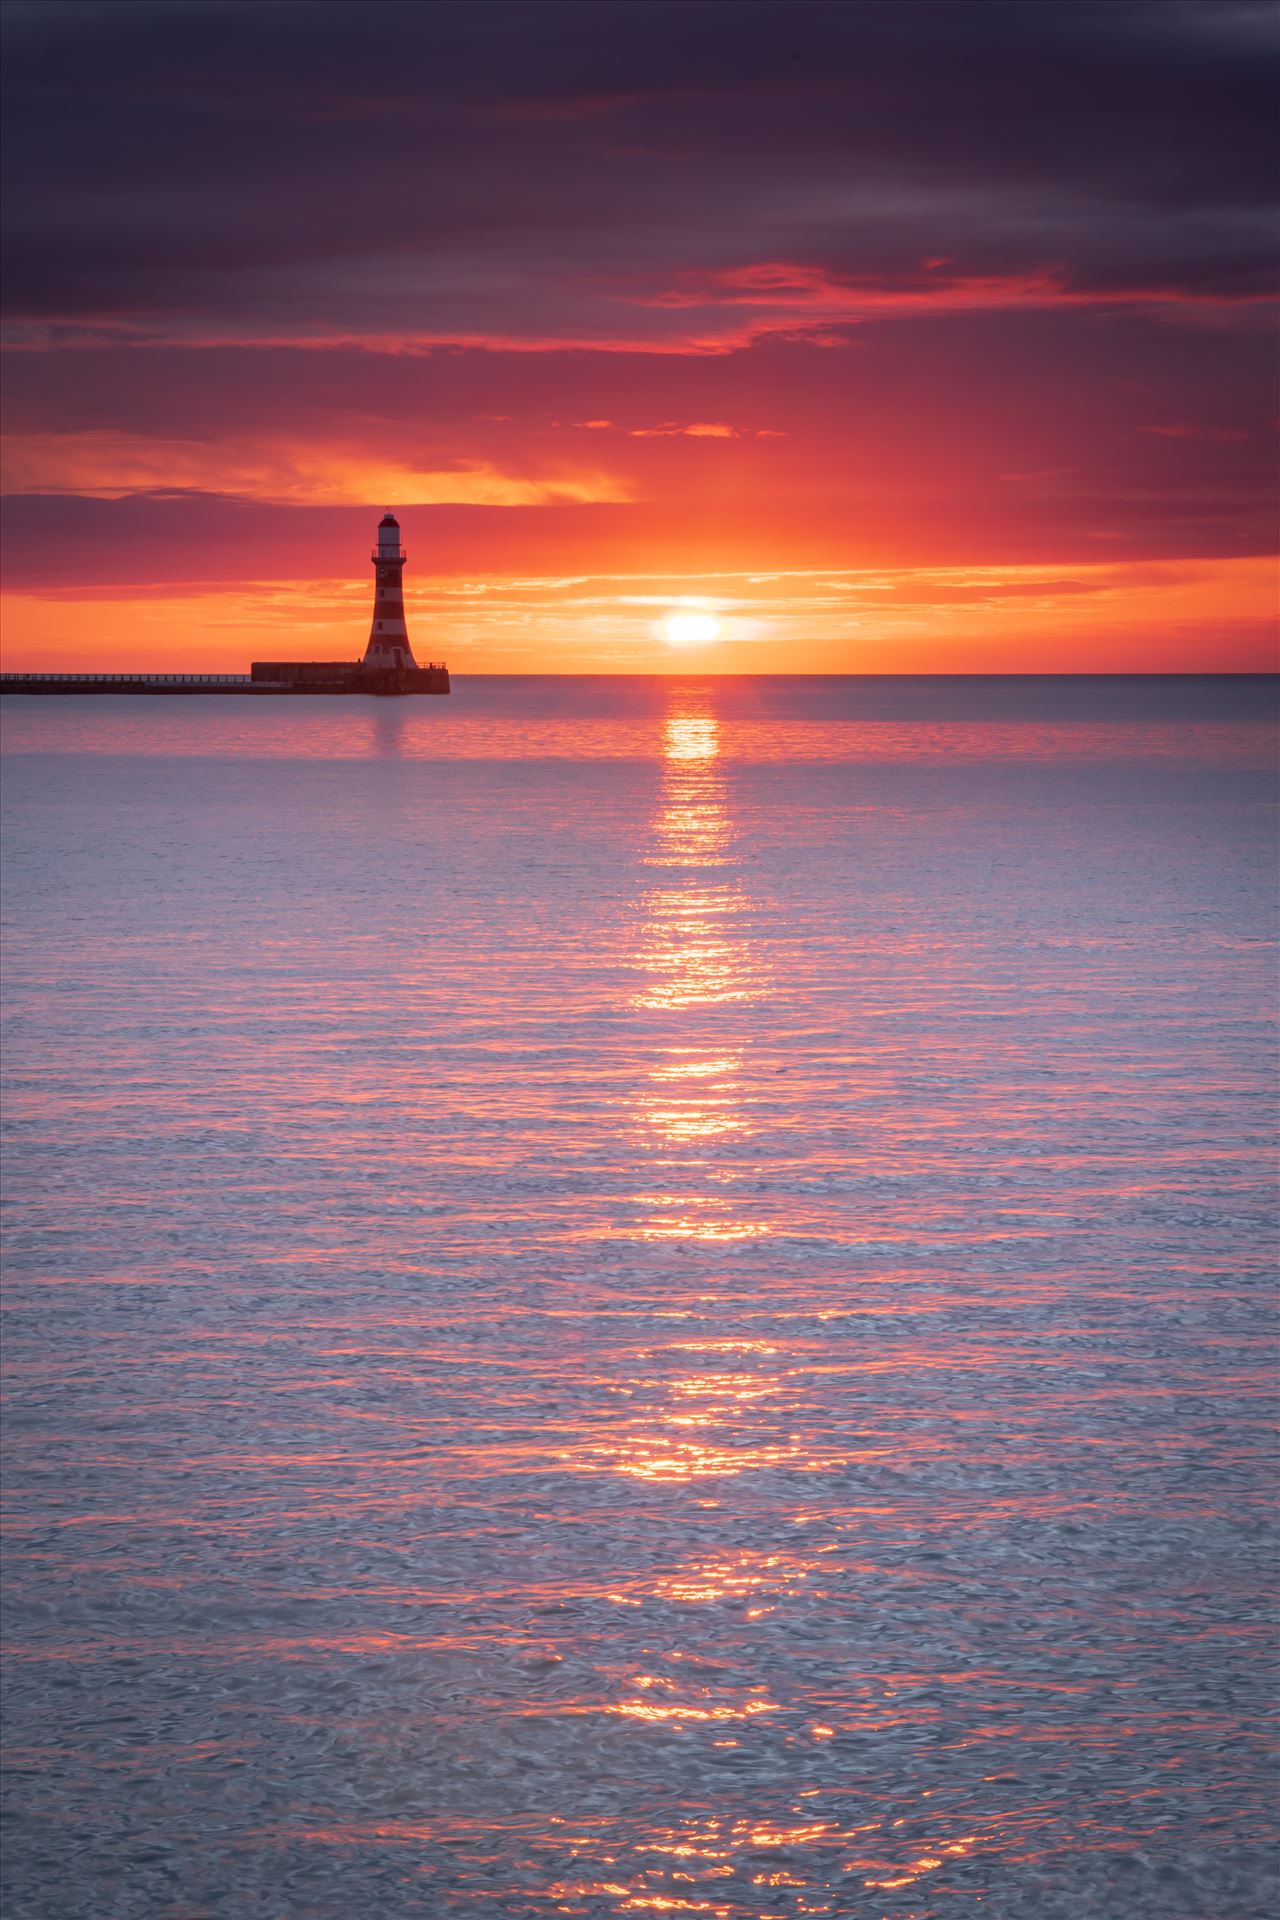 Sunrise at Roker Pier  by philreay